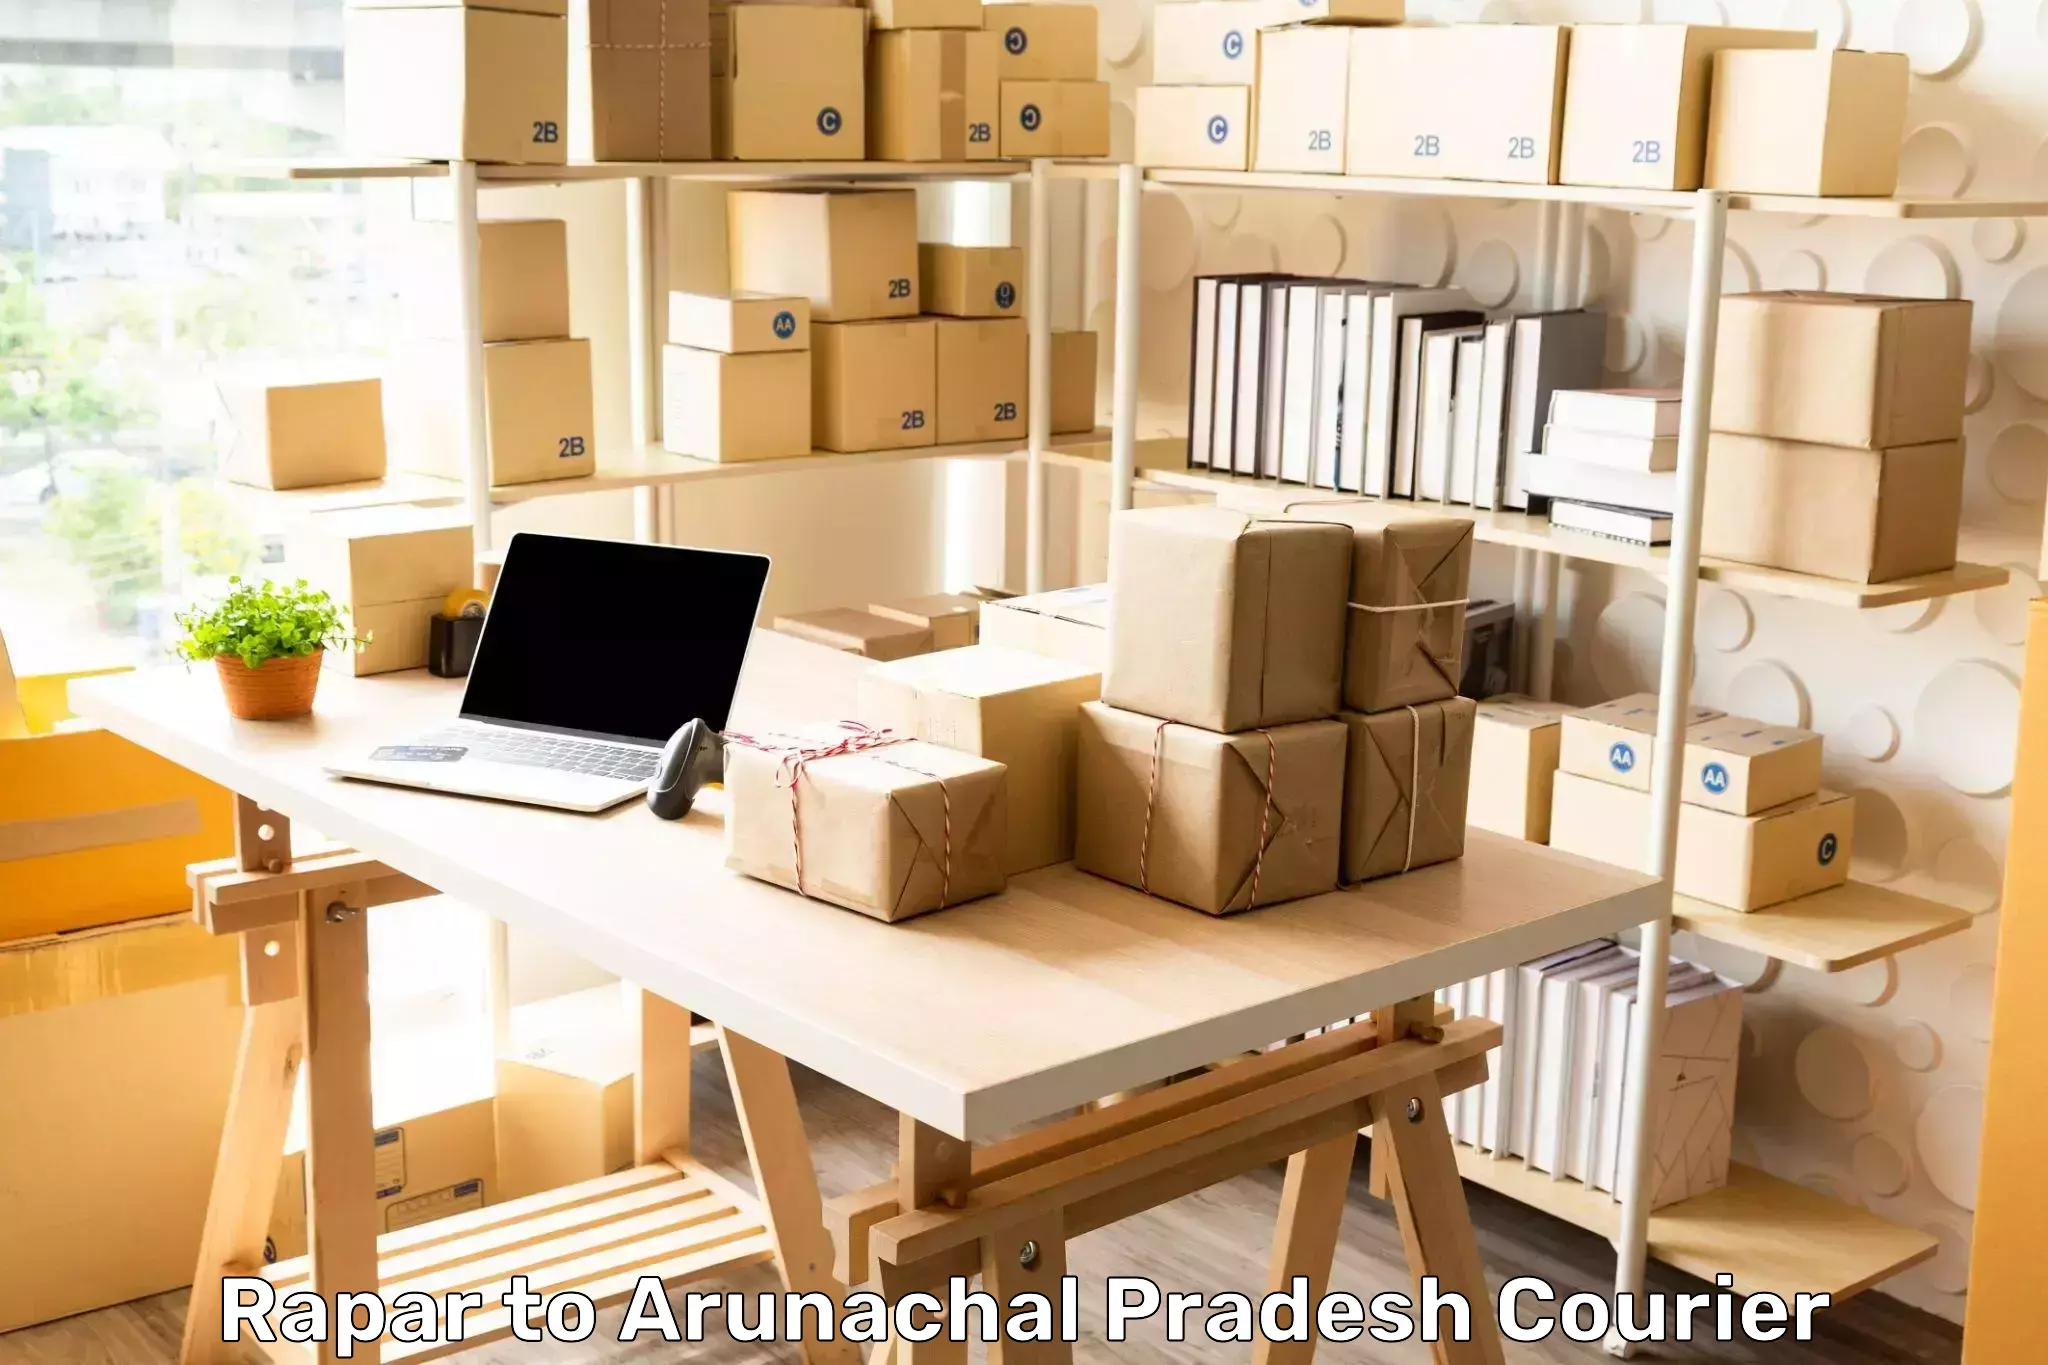 State-of-the-art courier technology in Rapar to Itanagar